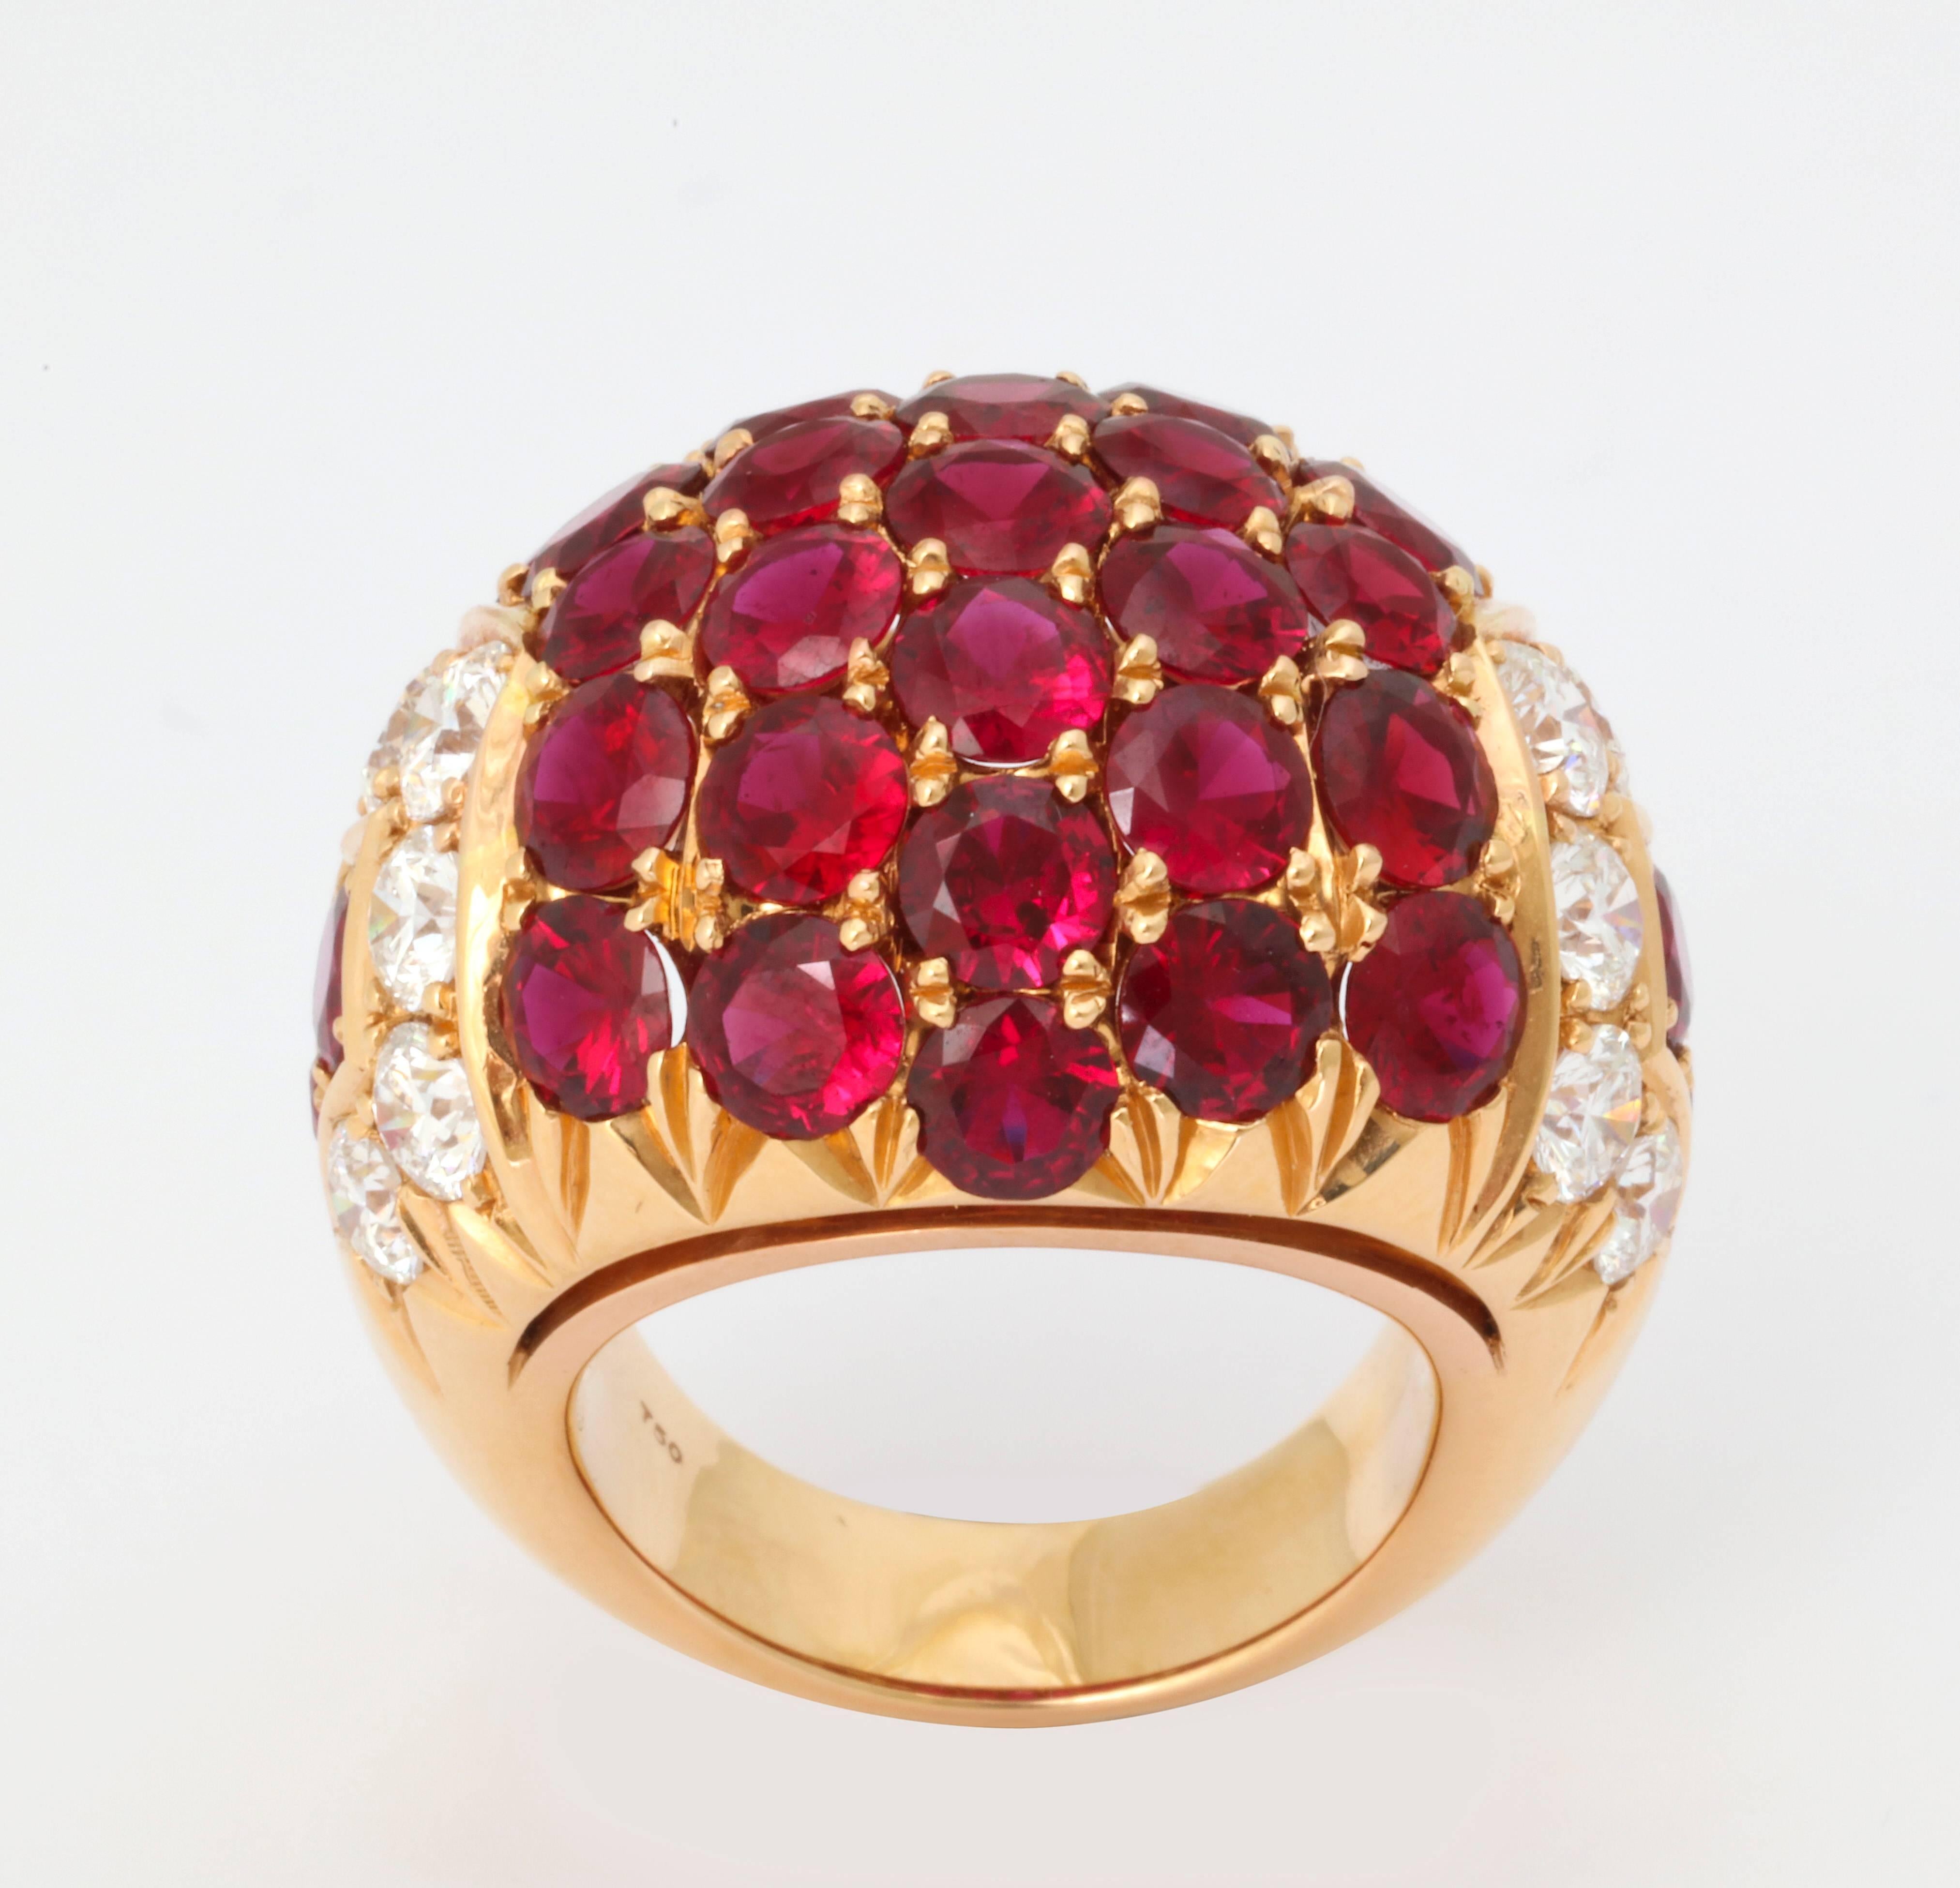 This ring is a wonderful, modern day example of the historically stylish cocktail ring.  The 33 rubies (9.05cts total weight) are the finest examples, mined in Mozambique, and weigh an average of a over 1/4th of a carat each.  They are perfectly cut